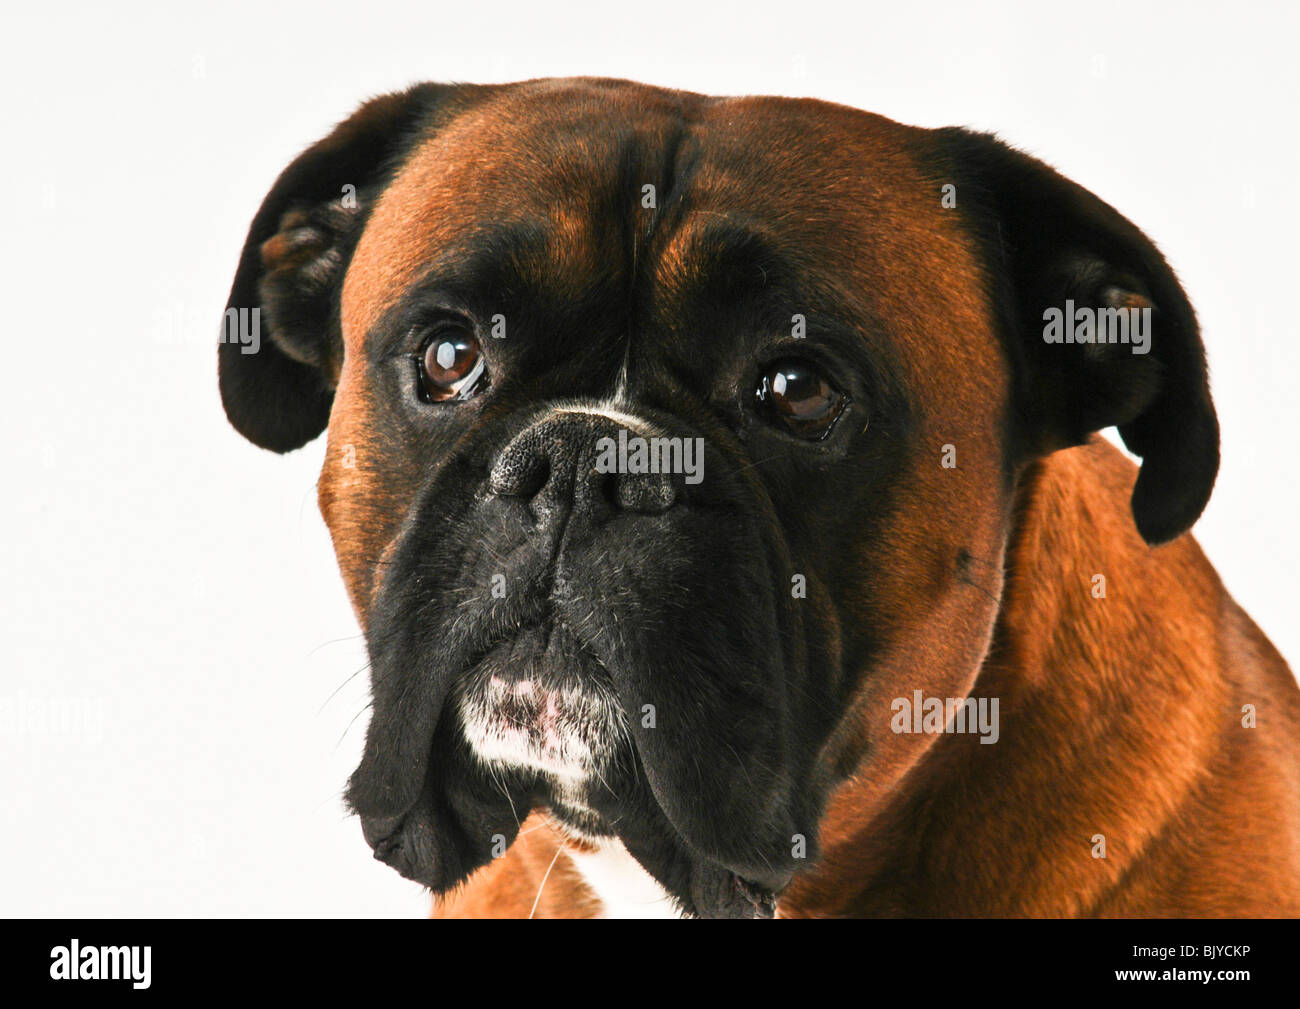 Head shot showing inquisitive playful facial expression of brown boxer dog  with black mask over face and eyes and white marking Stock Photo - Alamy